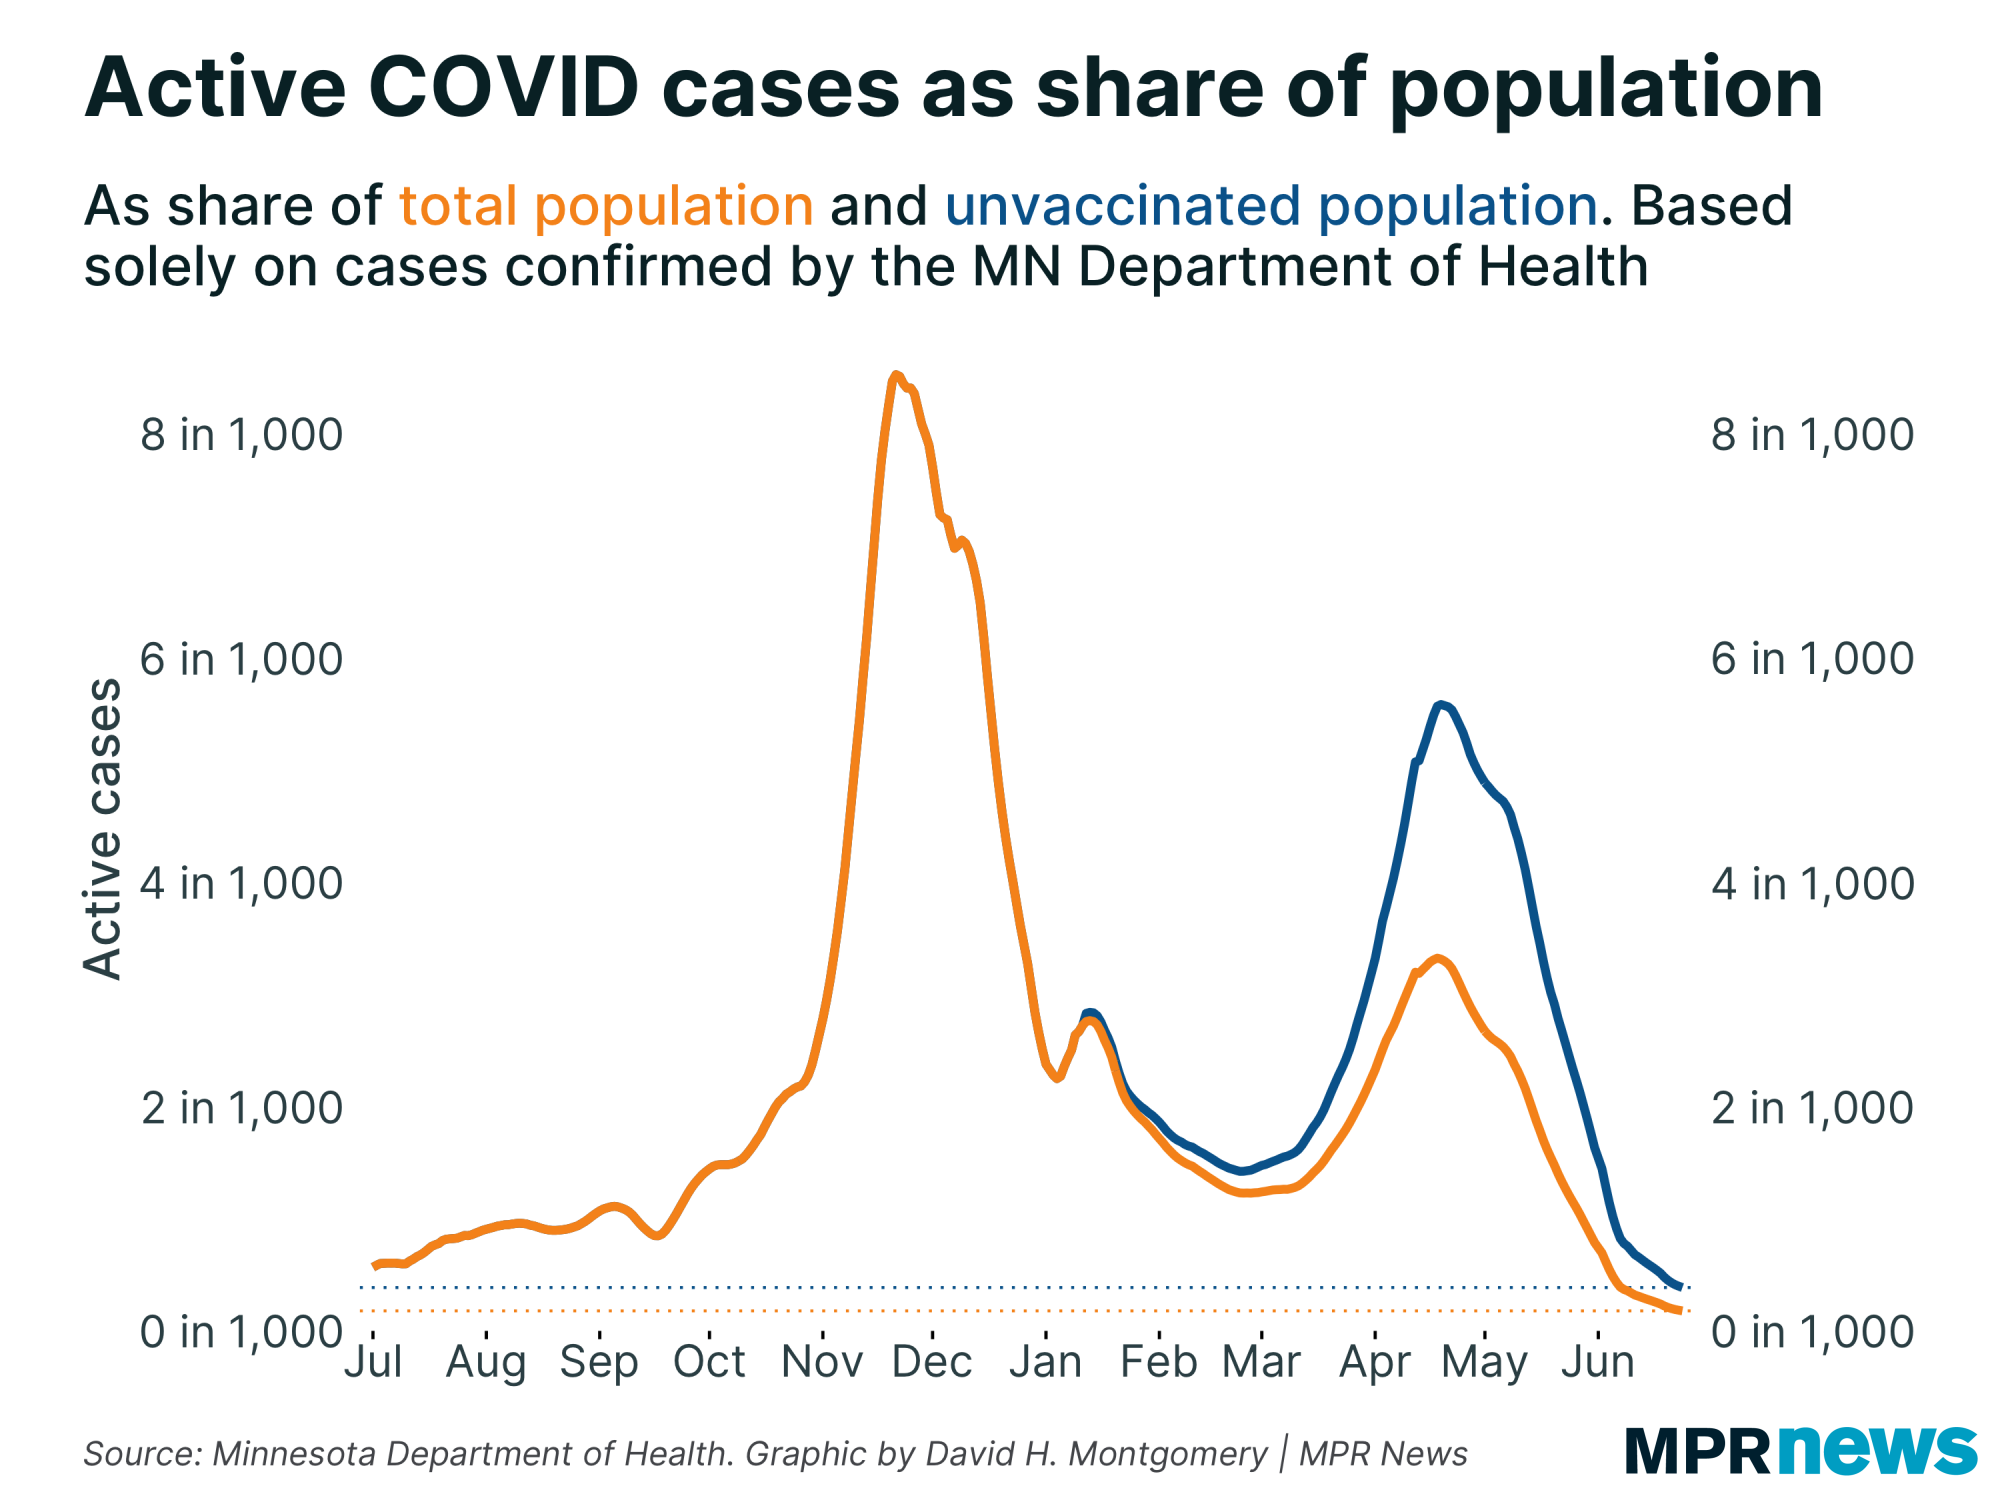 Graph of active, confirmed COVID-19 cases in Minnesota as a share of the total and unvaccinated population